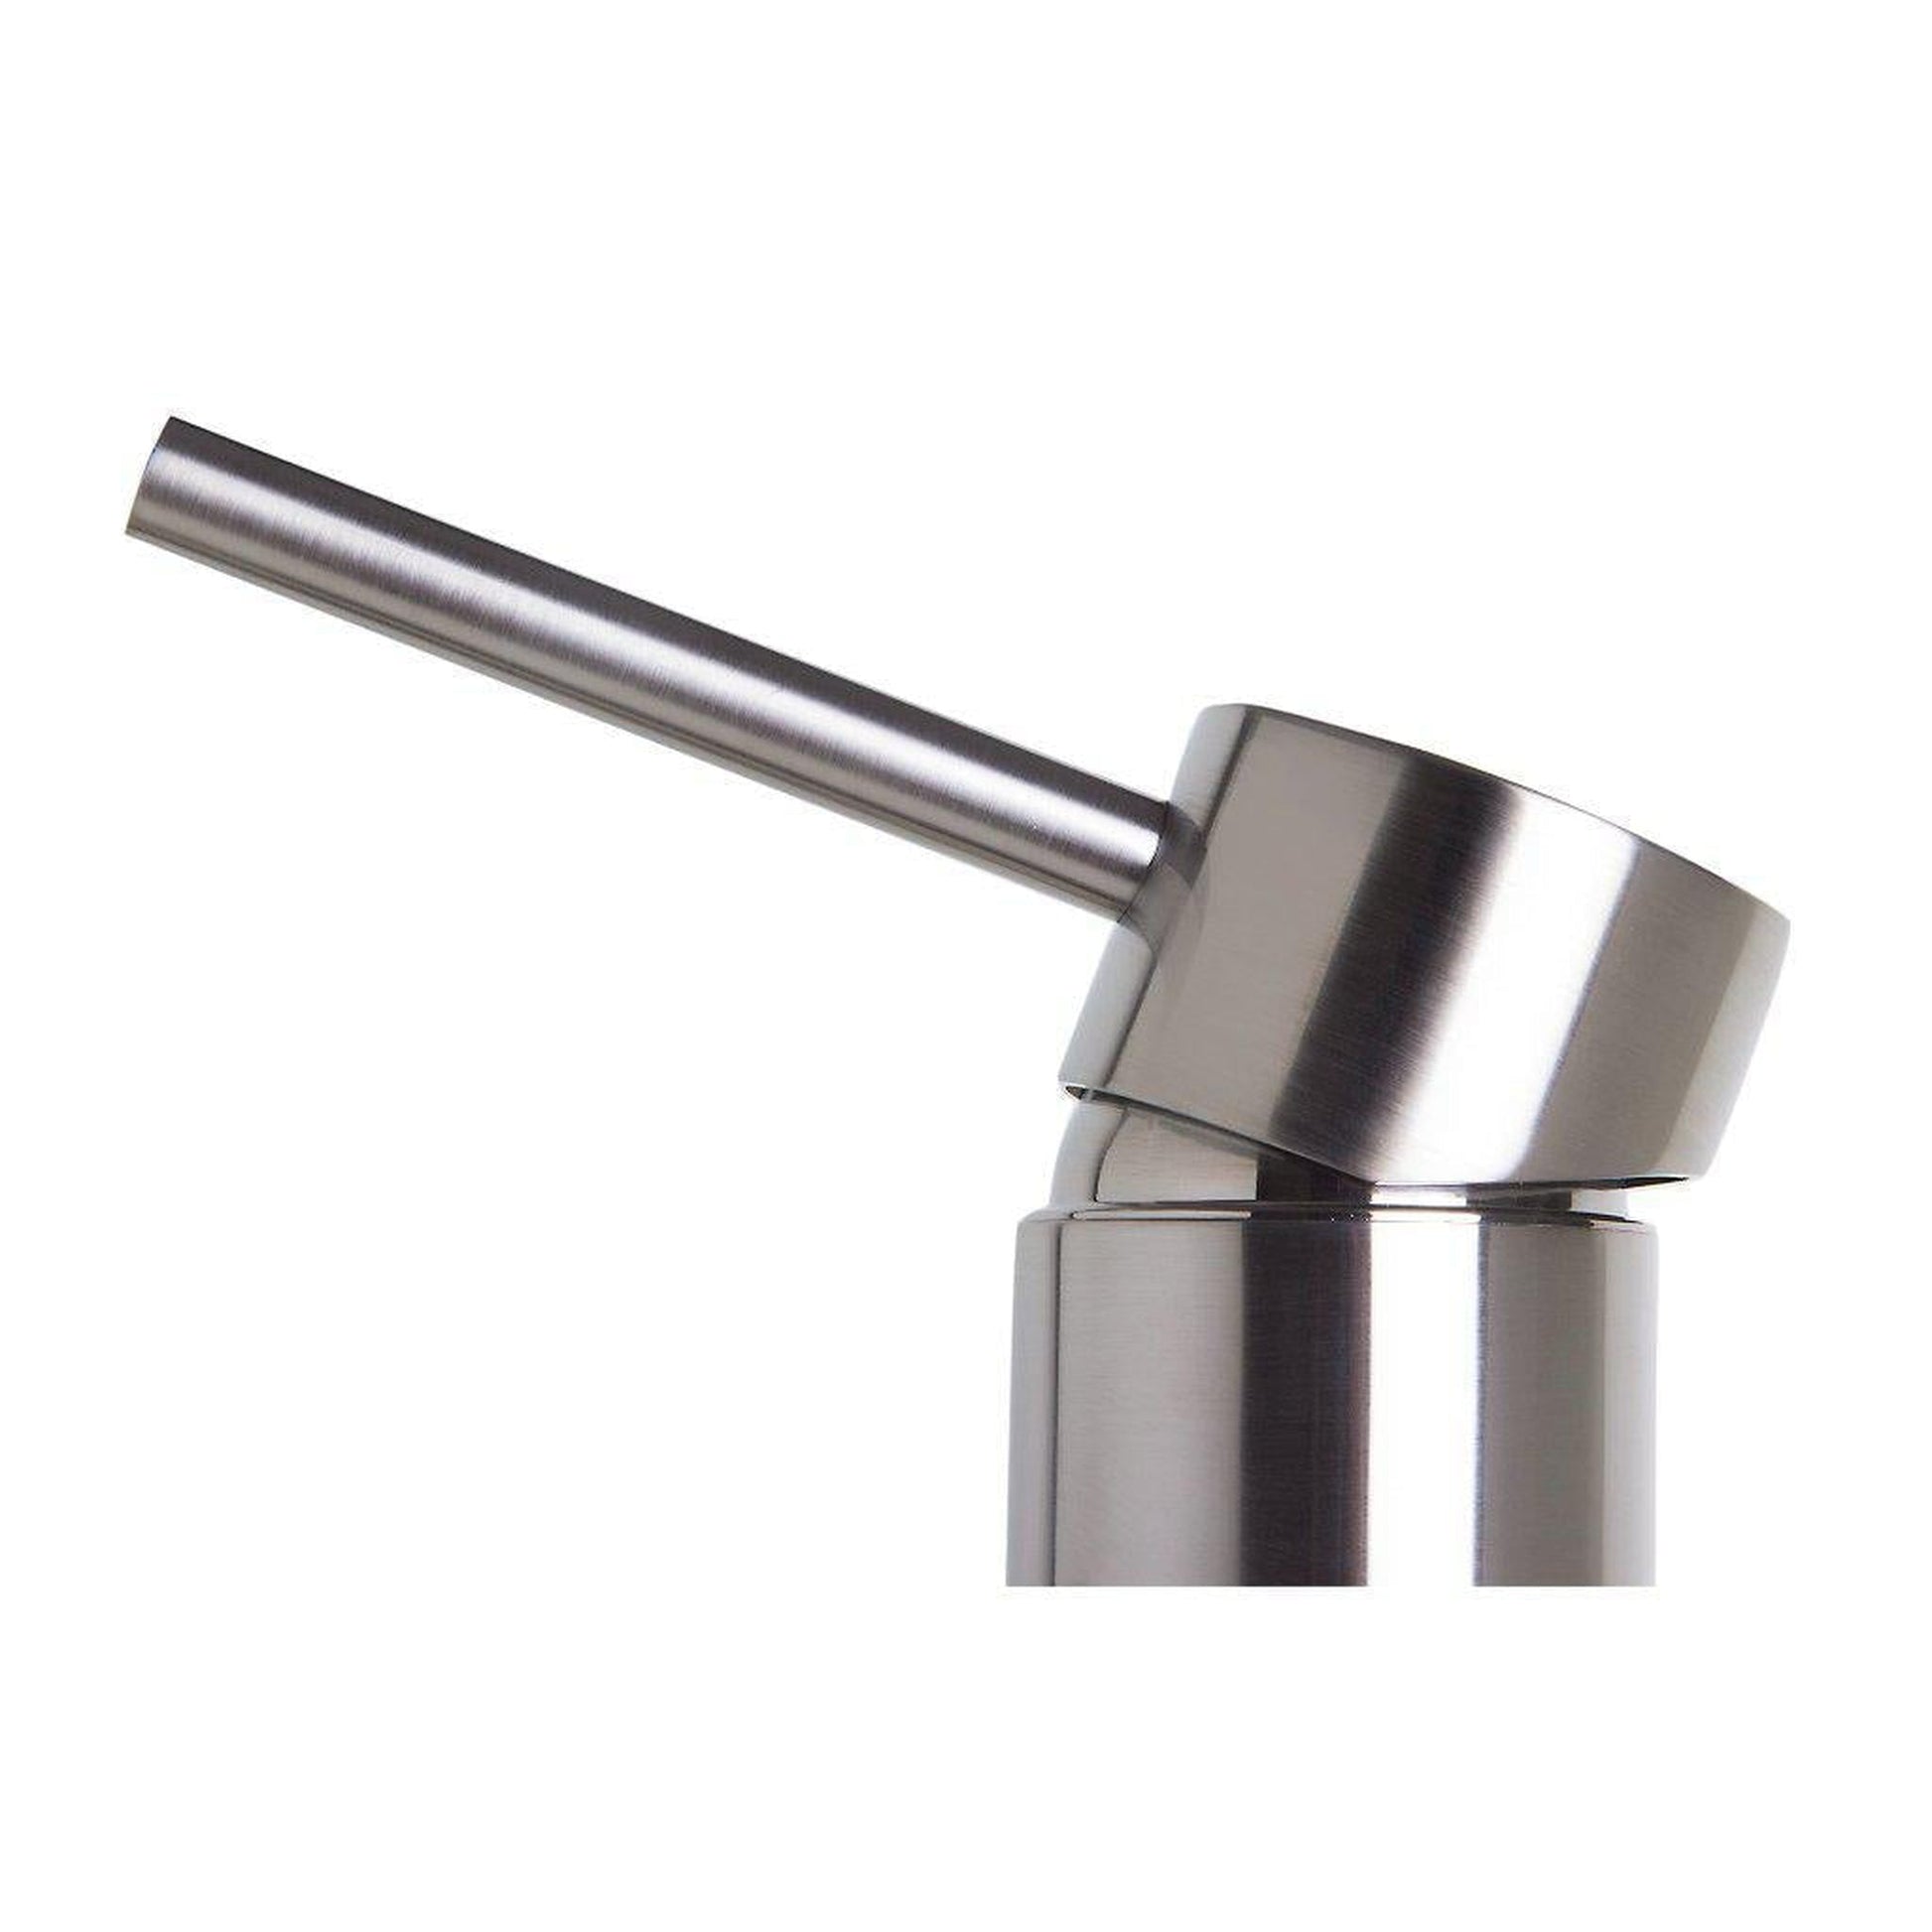 ALFI Brand AB1023-BN Brushed Nickel Vessel Round Spout Brass Bathroom Sink Faucet With Single Lever